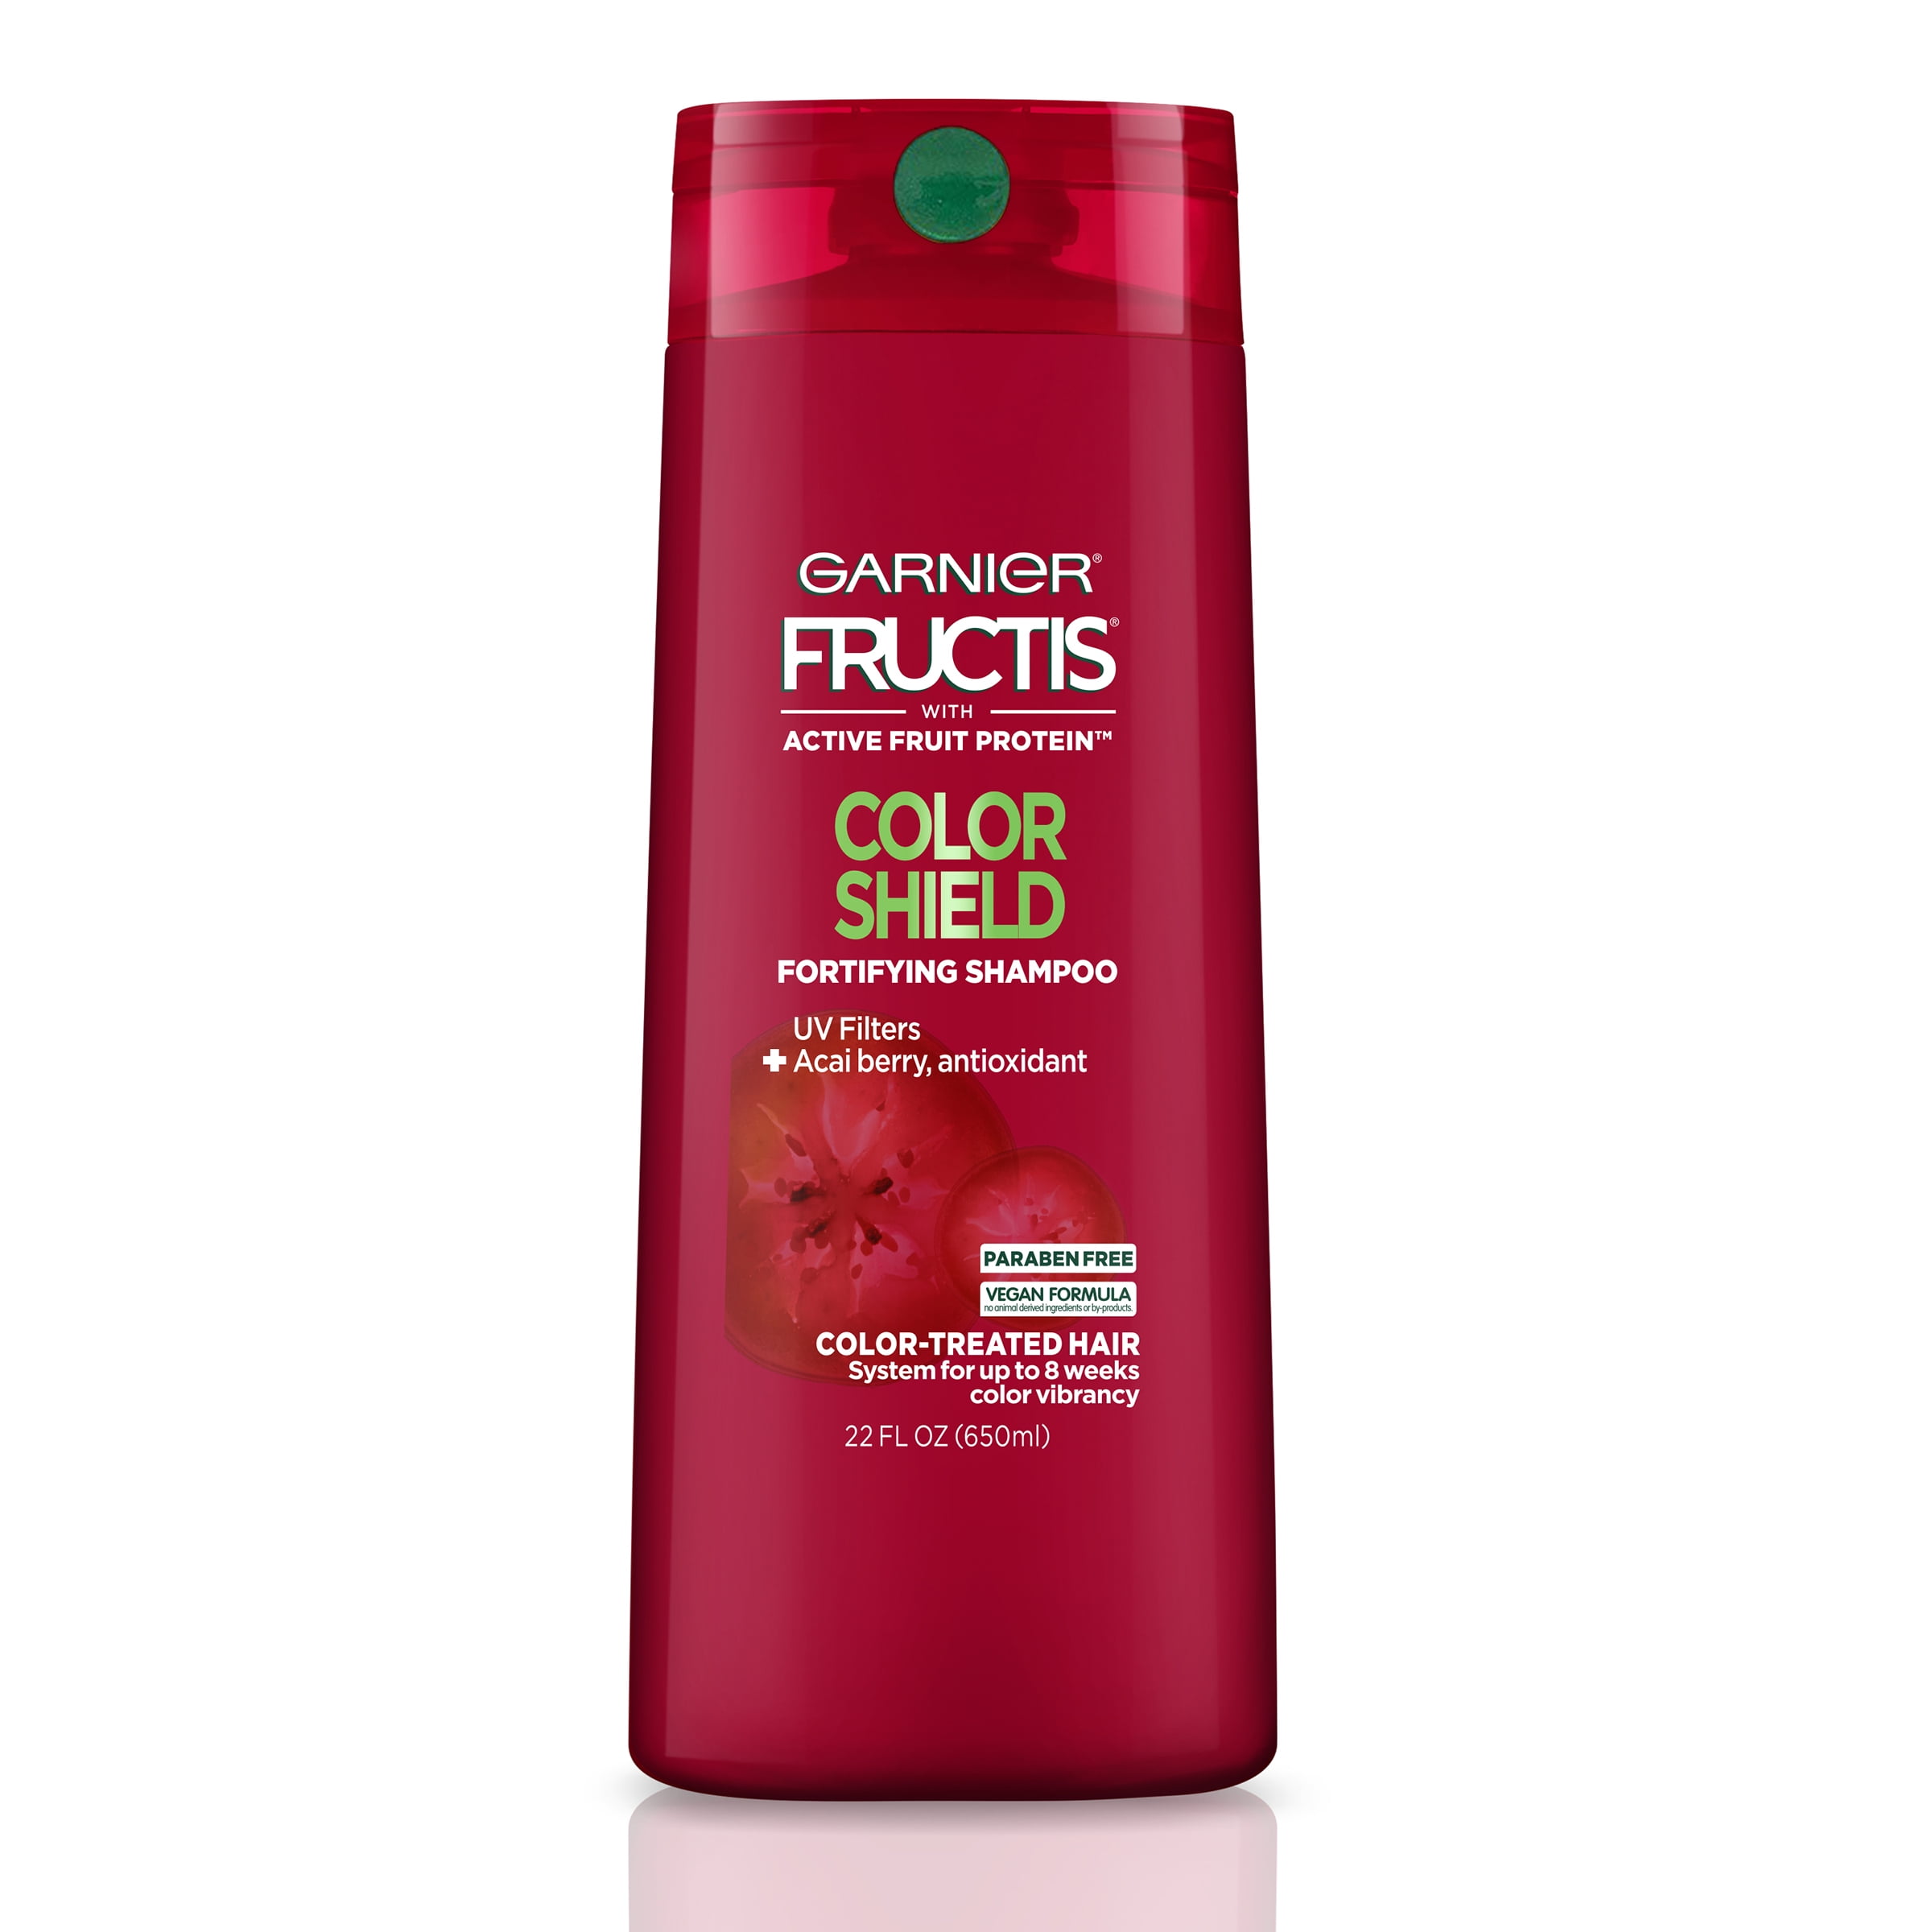 Garnier Fructis Color Shield Fortifying Shampoo for Color-Treated Hair, 22 fl oz